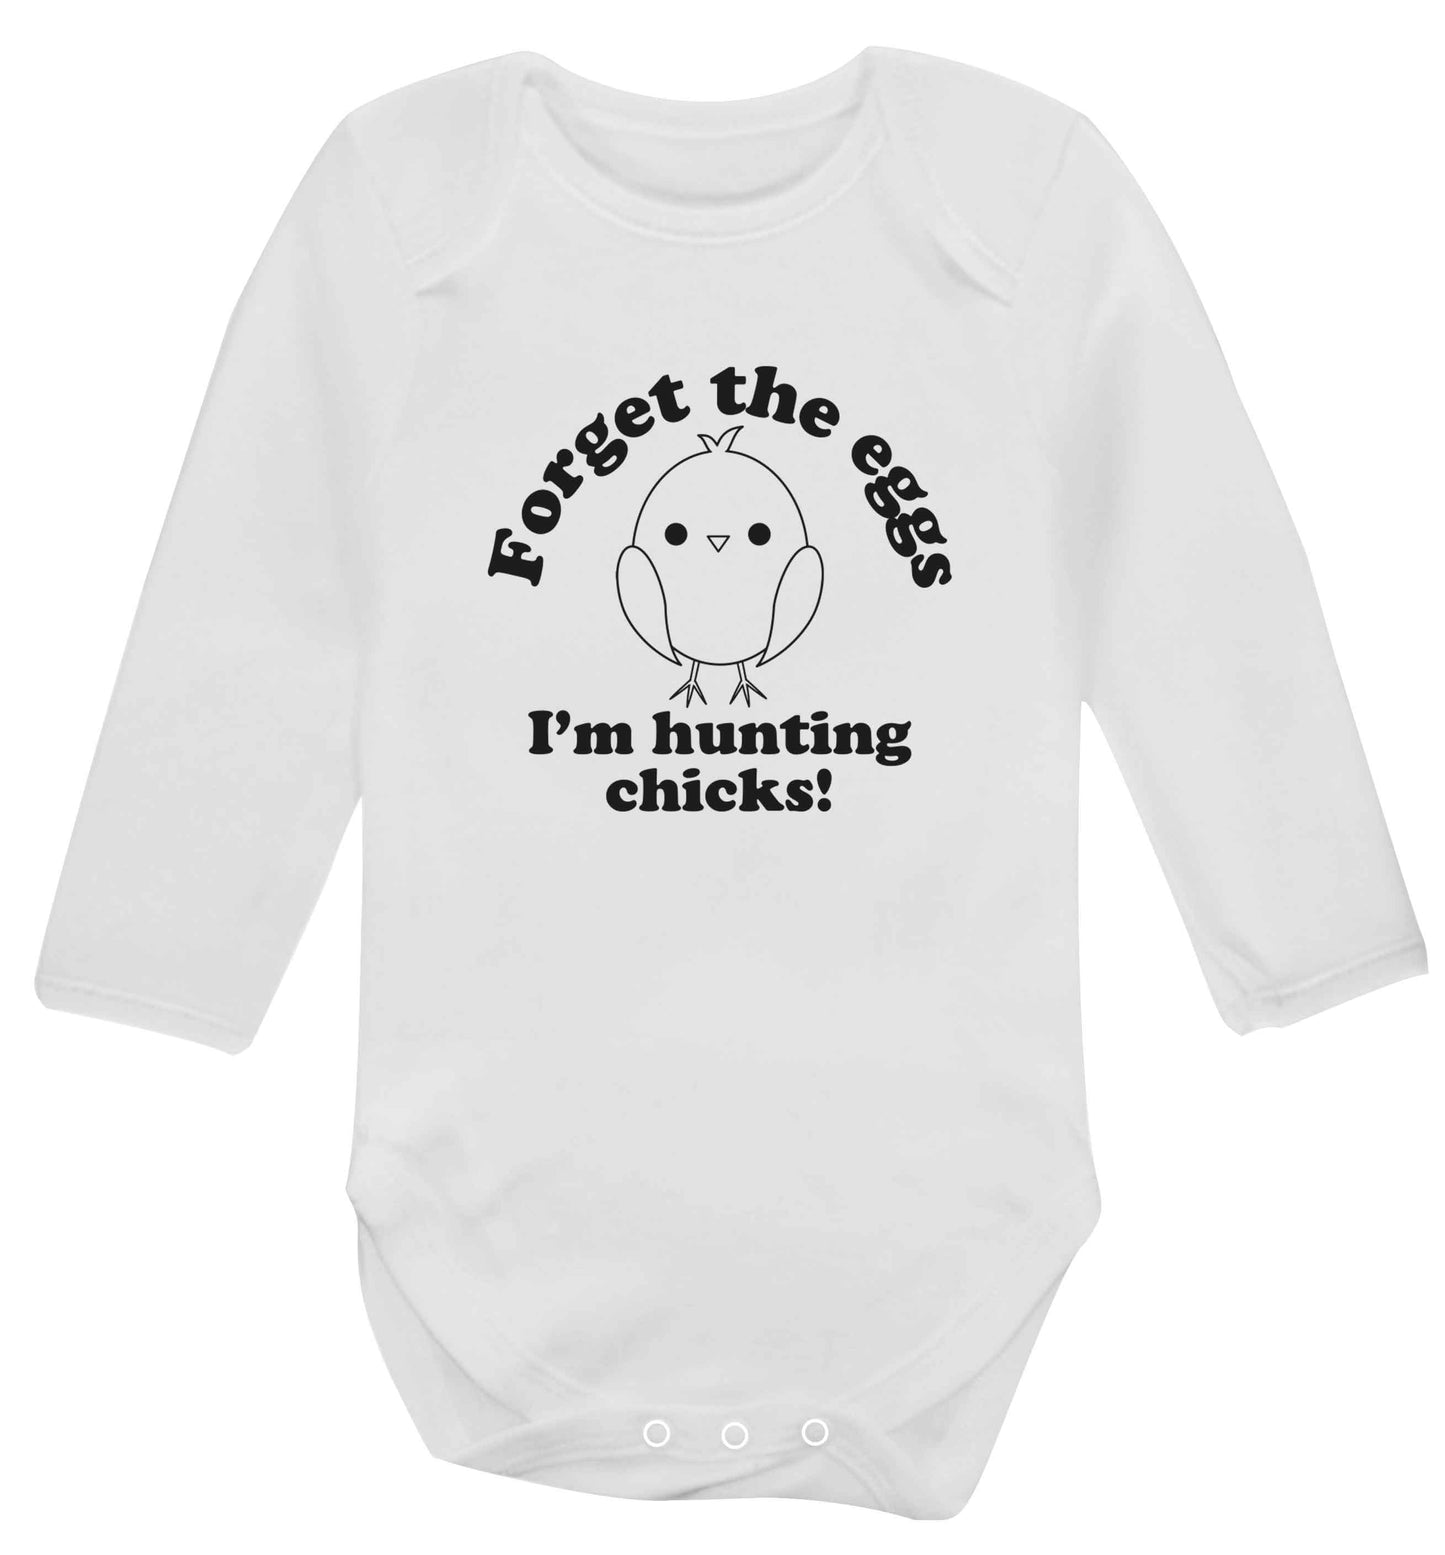 Forget the eggs I'm hunting chicks! baby vest long sleeved white 6-12 months